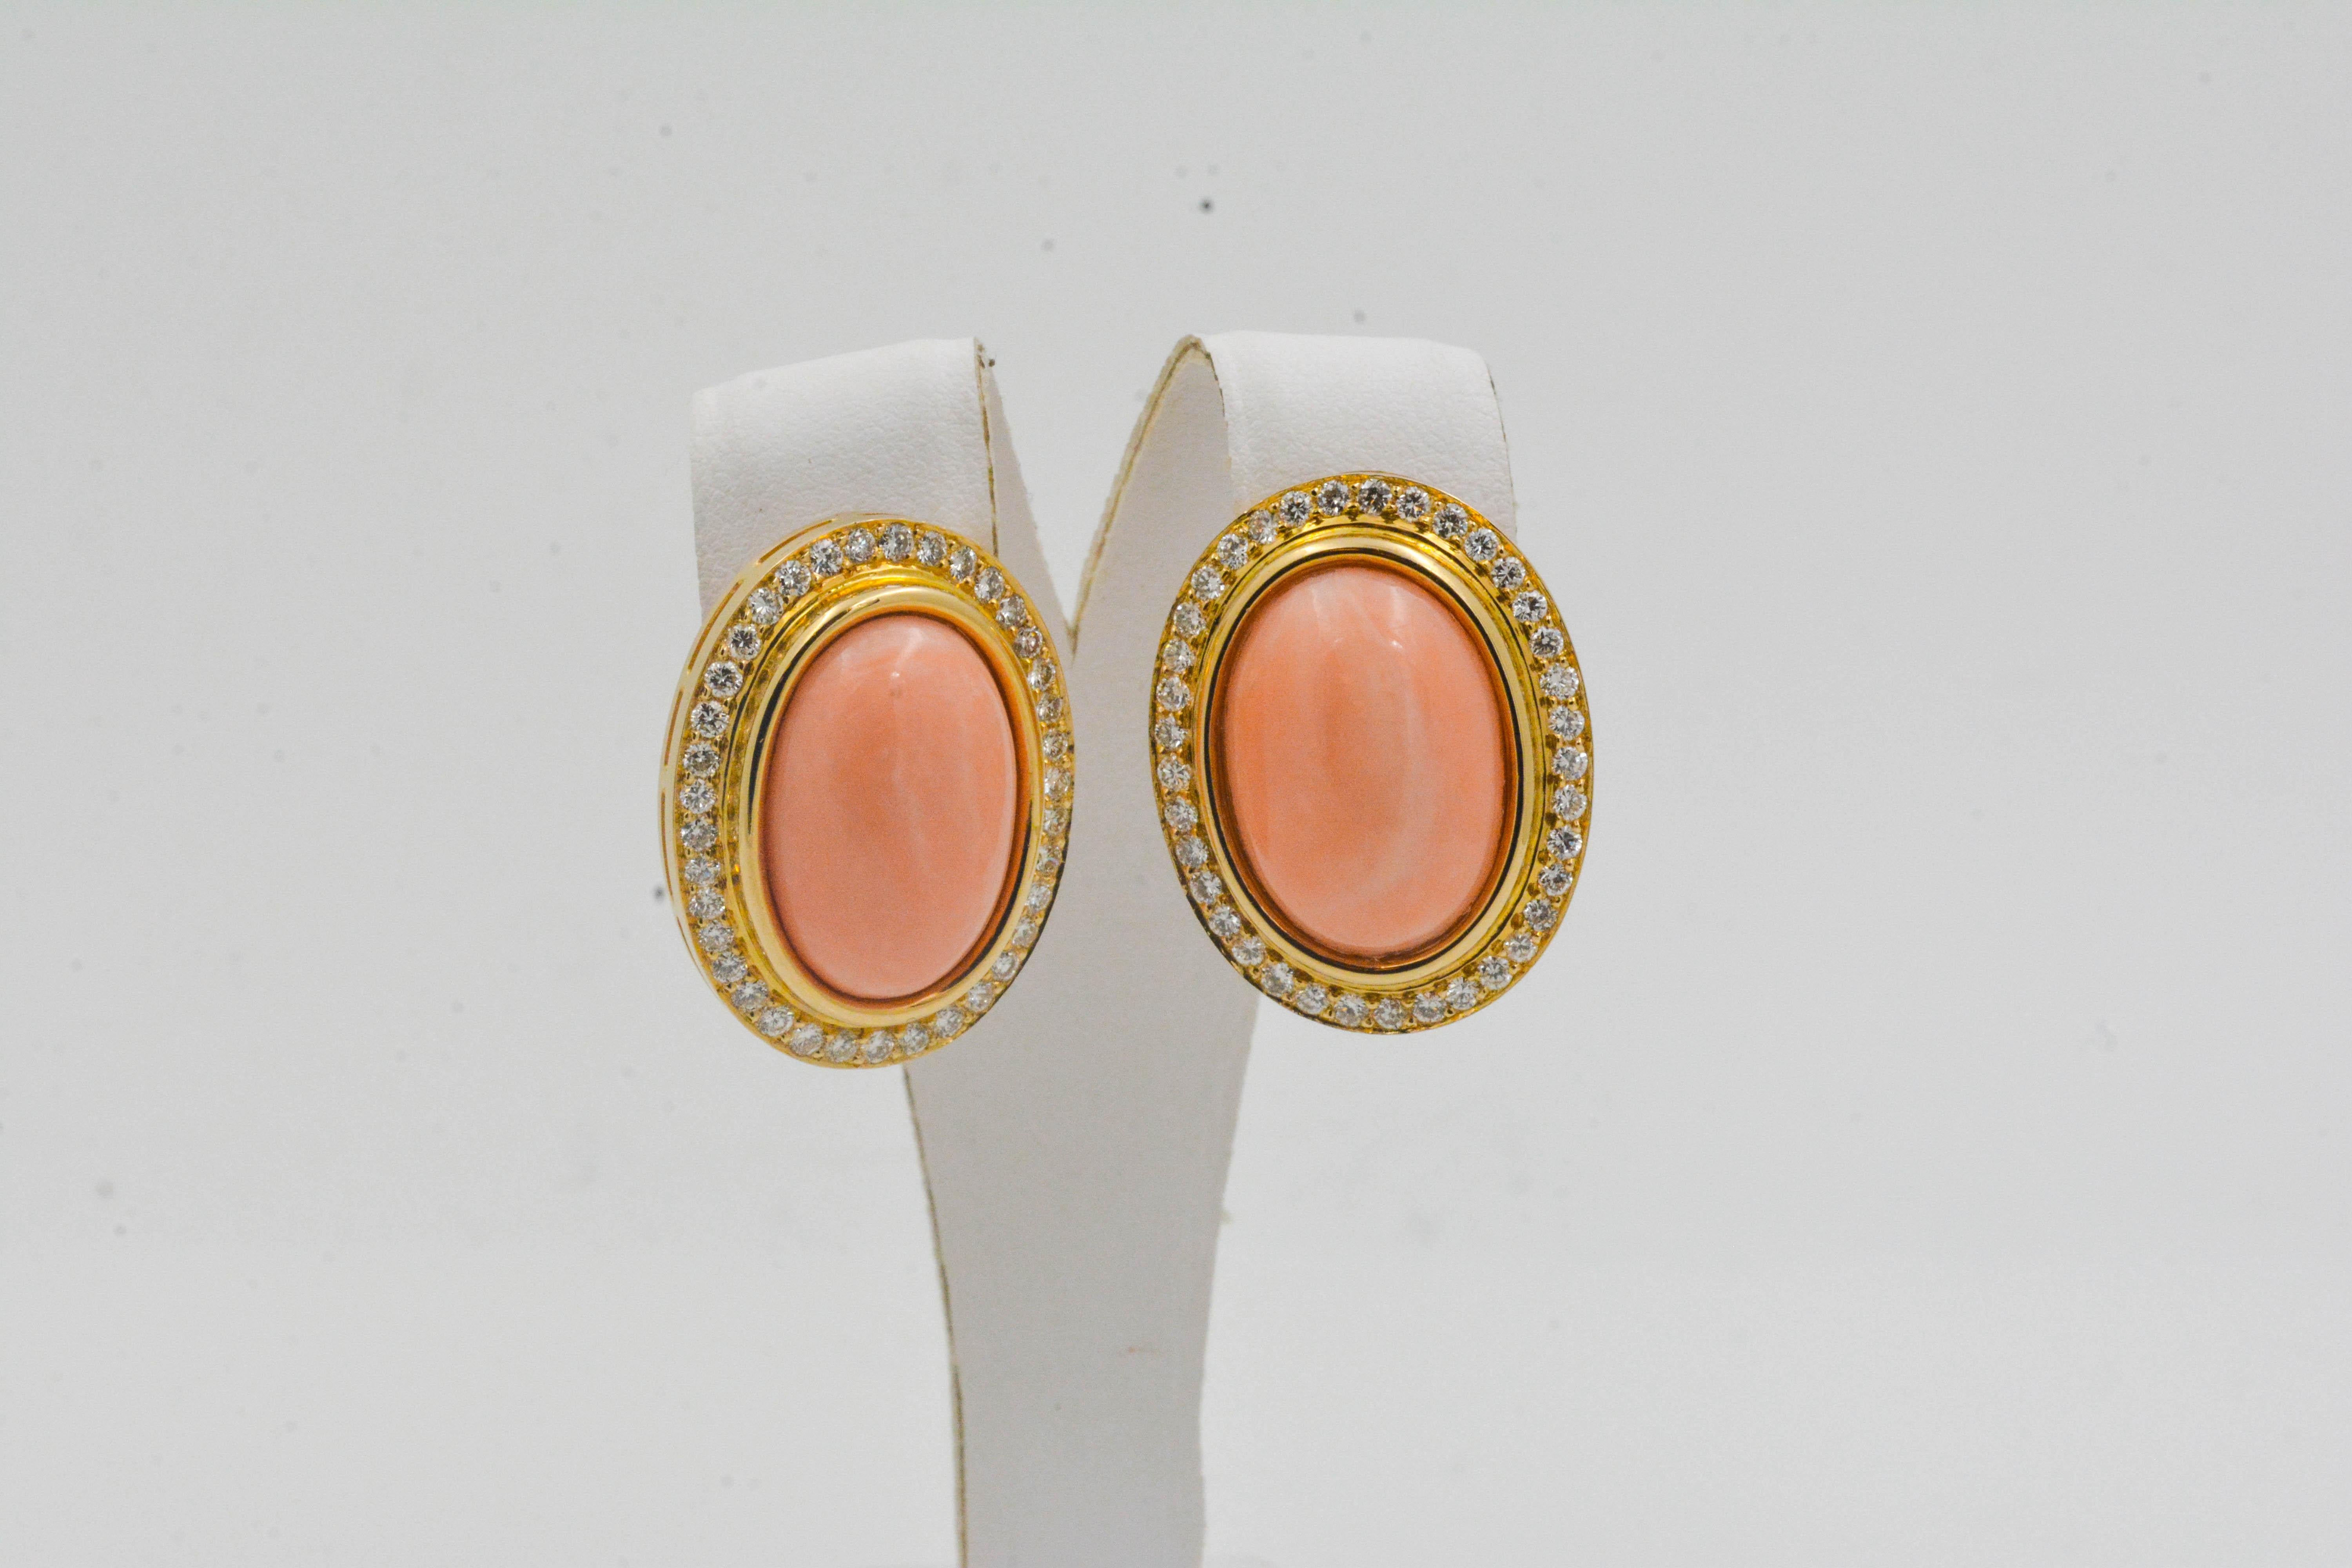 This 1980's set of 30.80 carat coral earrings are gorgeous. Two large oval coral stones are surrounded by 74 glittering round brilliant cut diamonds (1.92 carat total weight G-H color with VS clarity). These earrings are crafted in 14 karat yellow